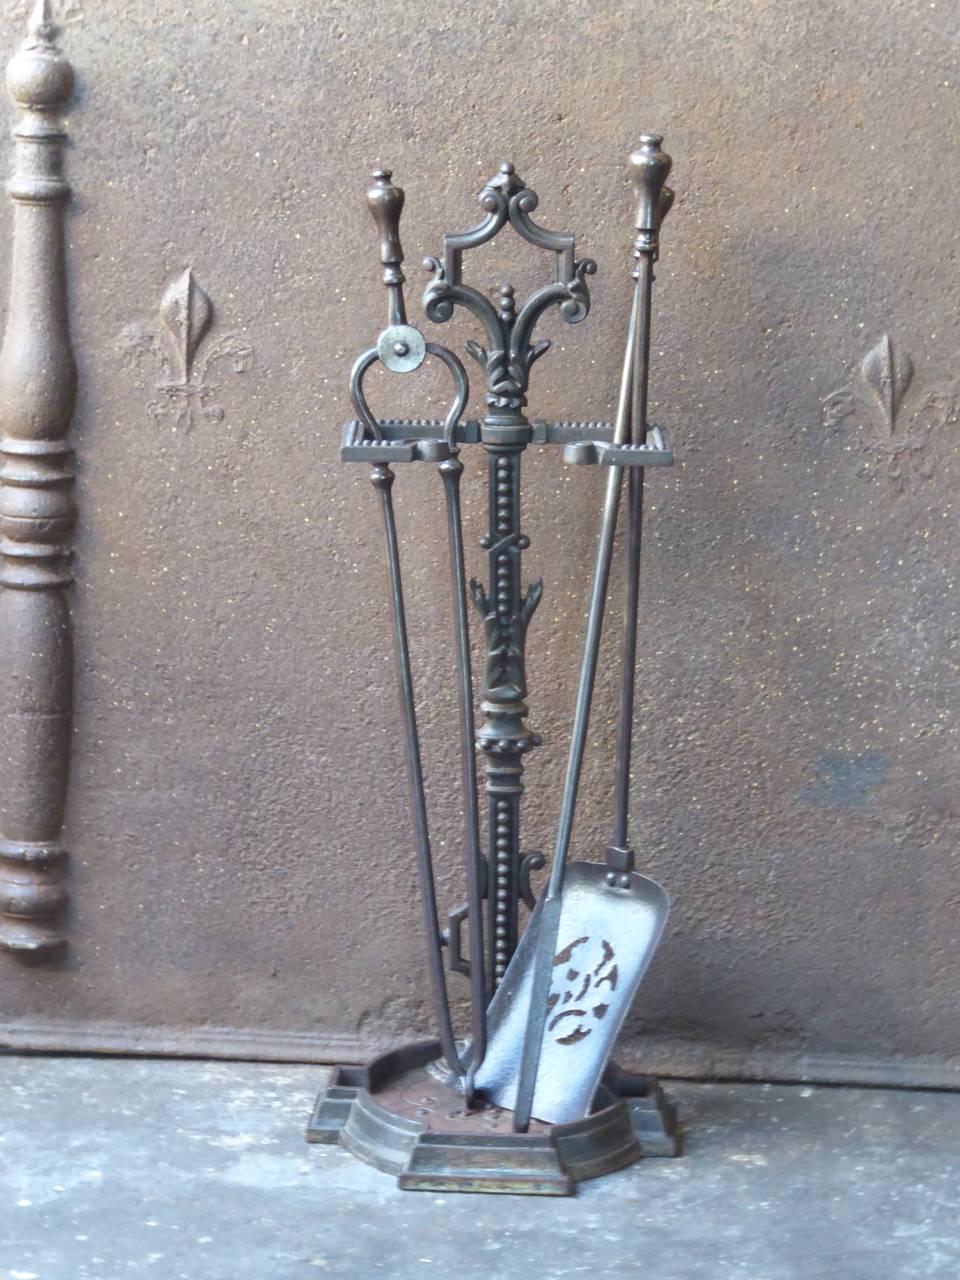 19th century English Victorian fireplace tool set - fire irons made of cast iron and wrought iron.

We have a unique and specialized collection of antique and used fireplace accessories consisting of more than 1000 listings at 1stdibs. Amongst